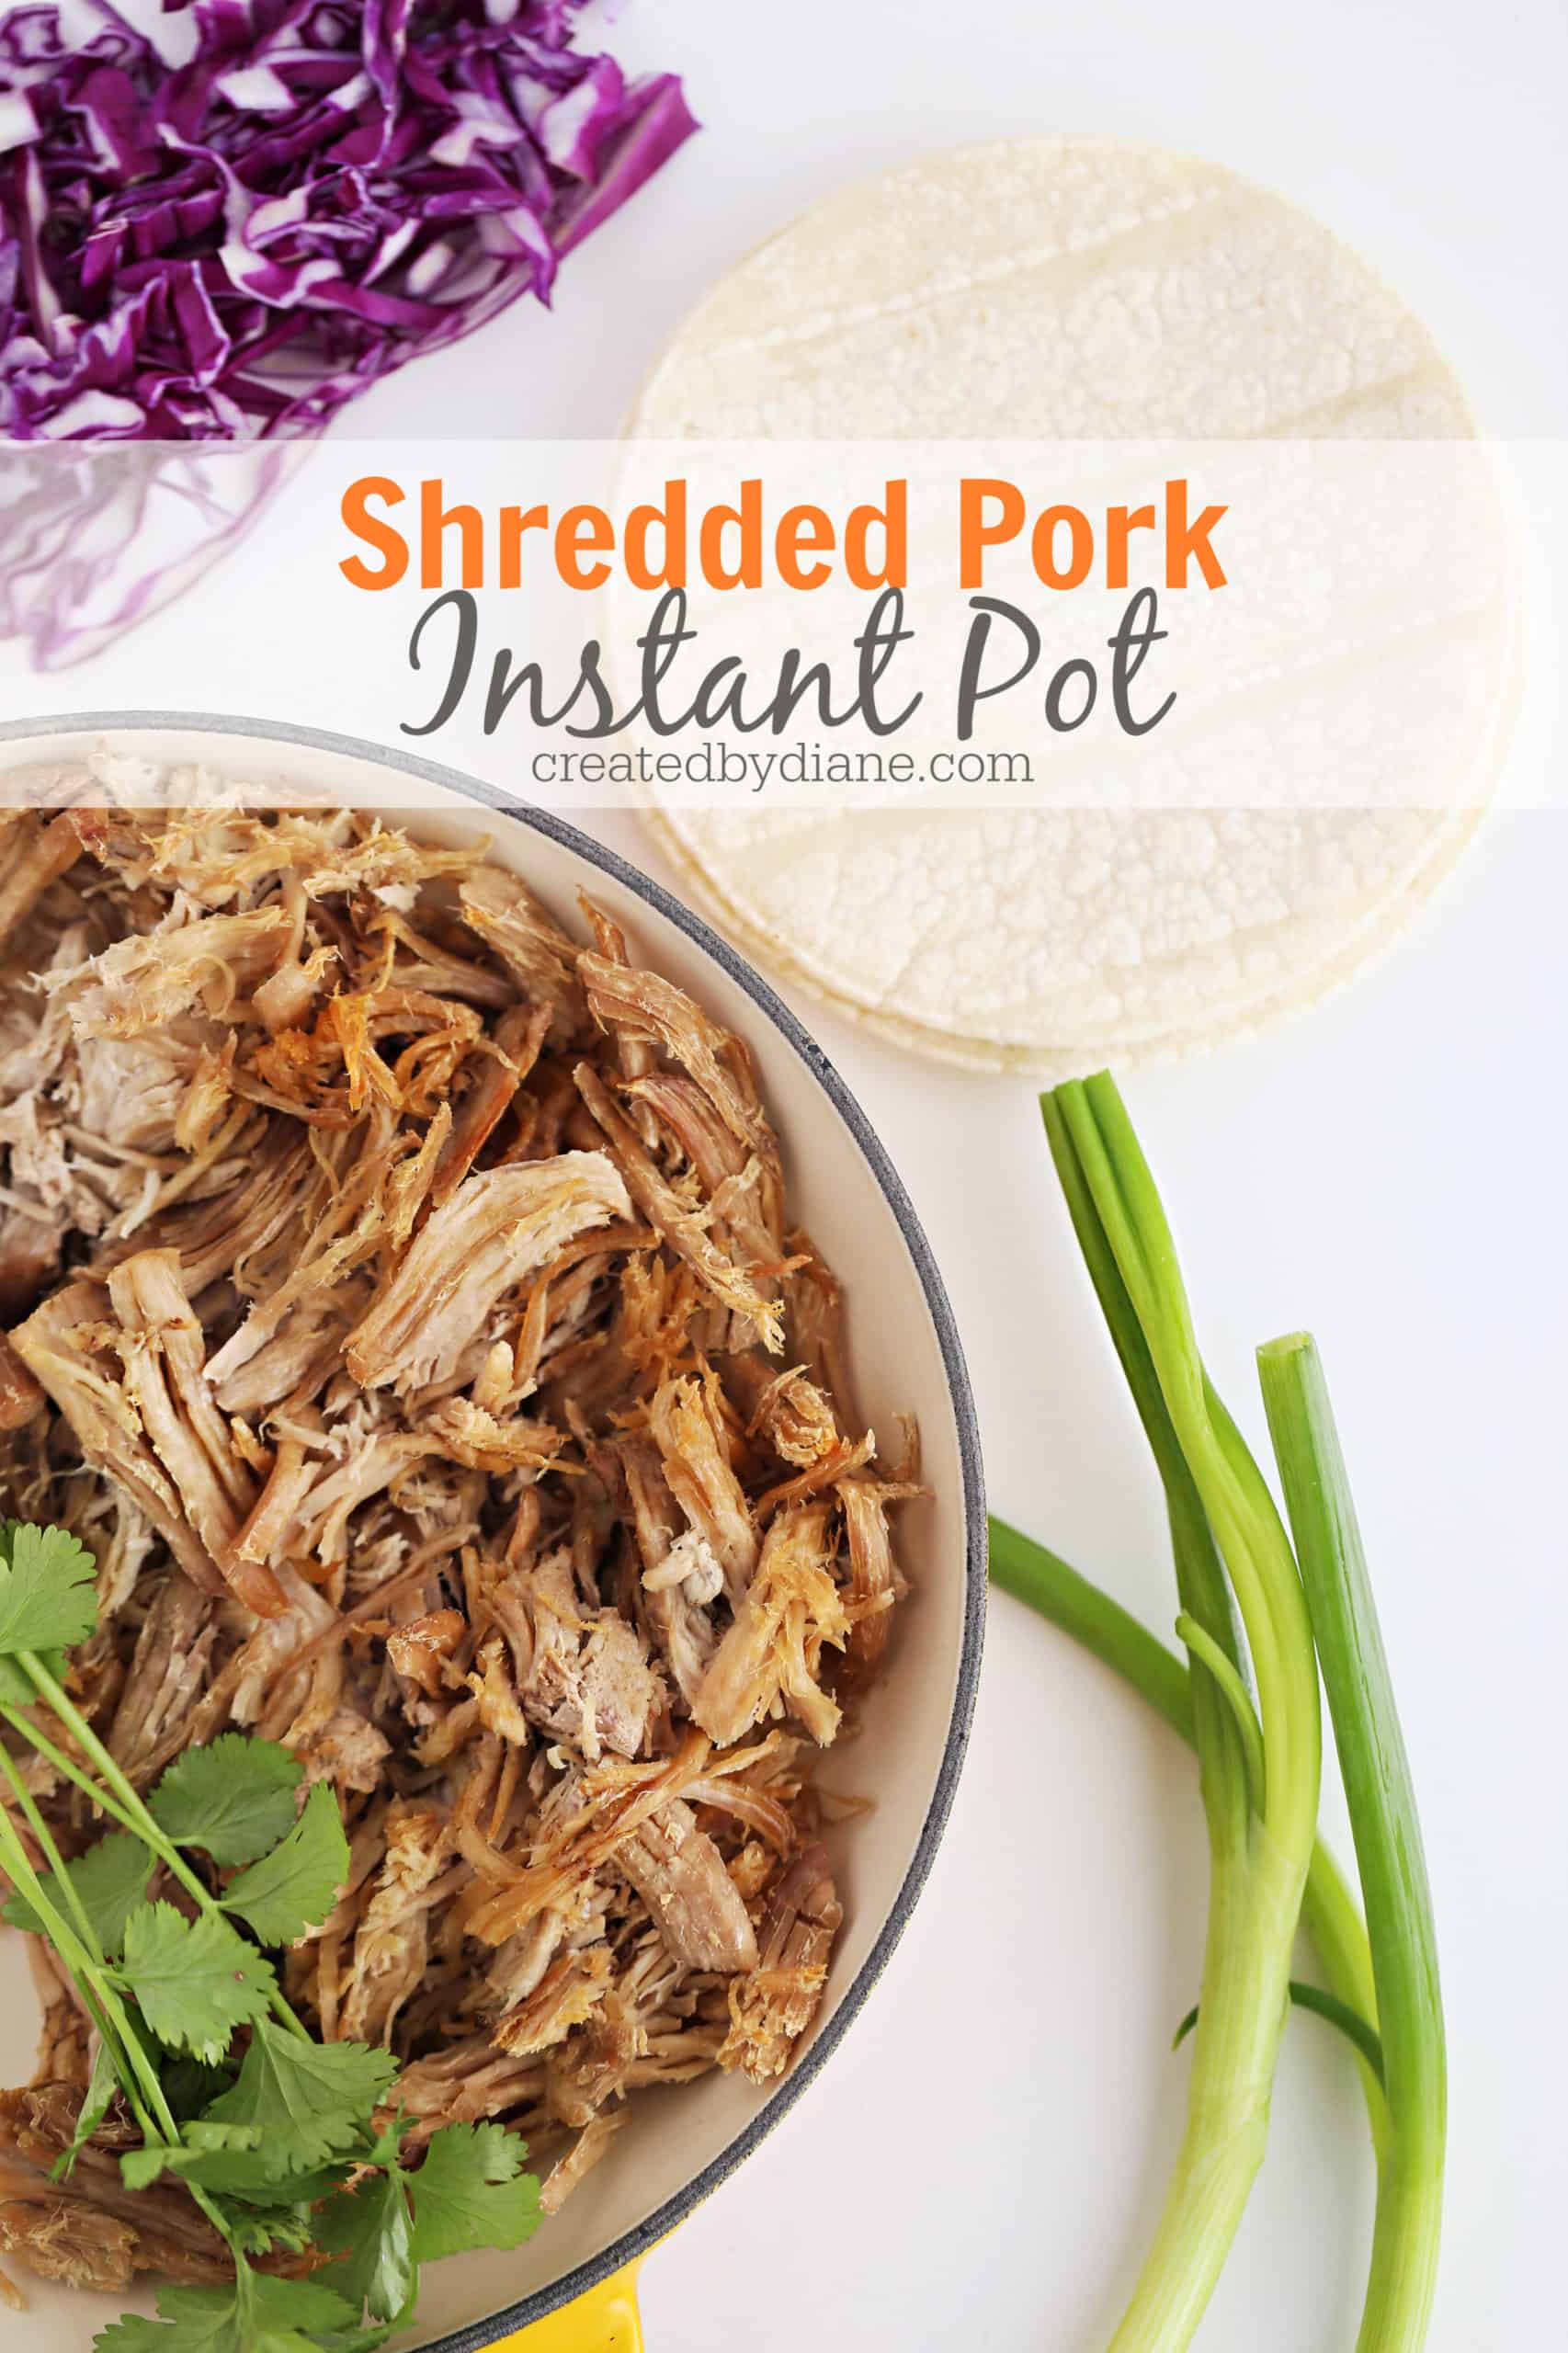 Pulled Pork Recipe {oven, slow cooker, or instant pot} - Belly Full